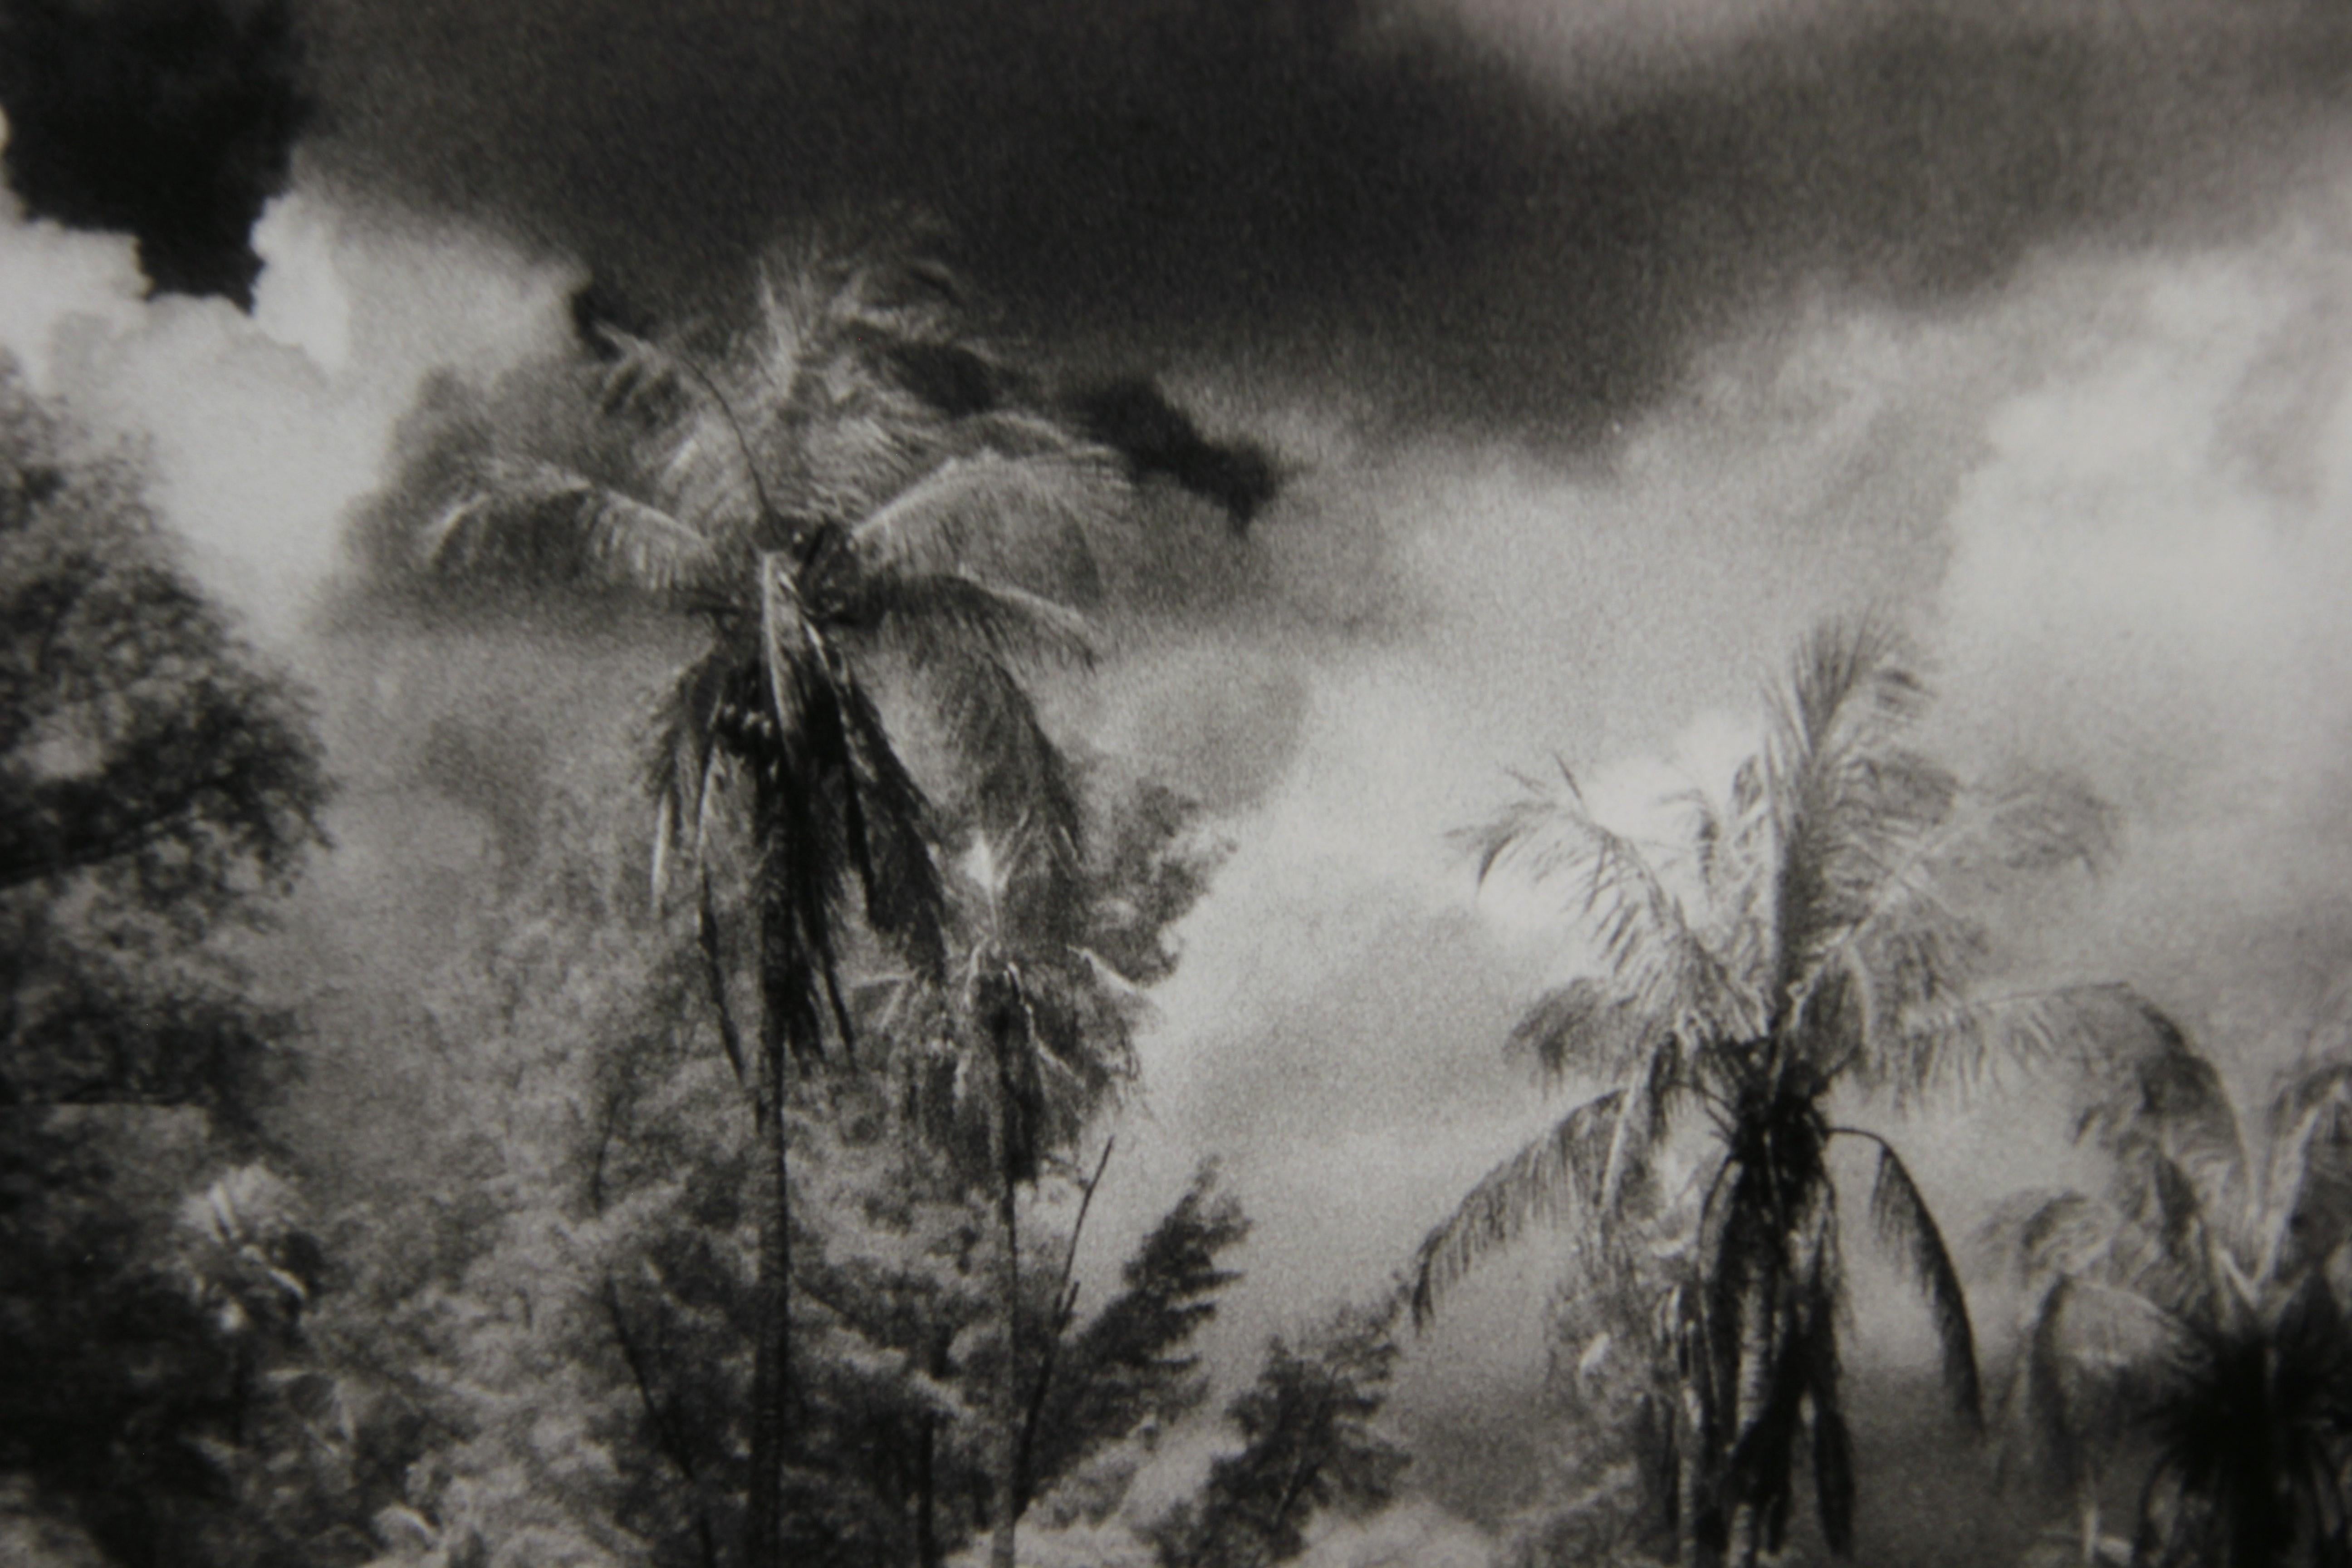 This black and white photo shows an island with palm trees and a cloudy sky. The photograph was developed using the Sabattier process. The photograph is not framed. 

Artist Biography: Pat Truax is a Texas based fine art photograph best known for